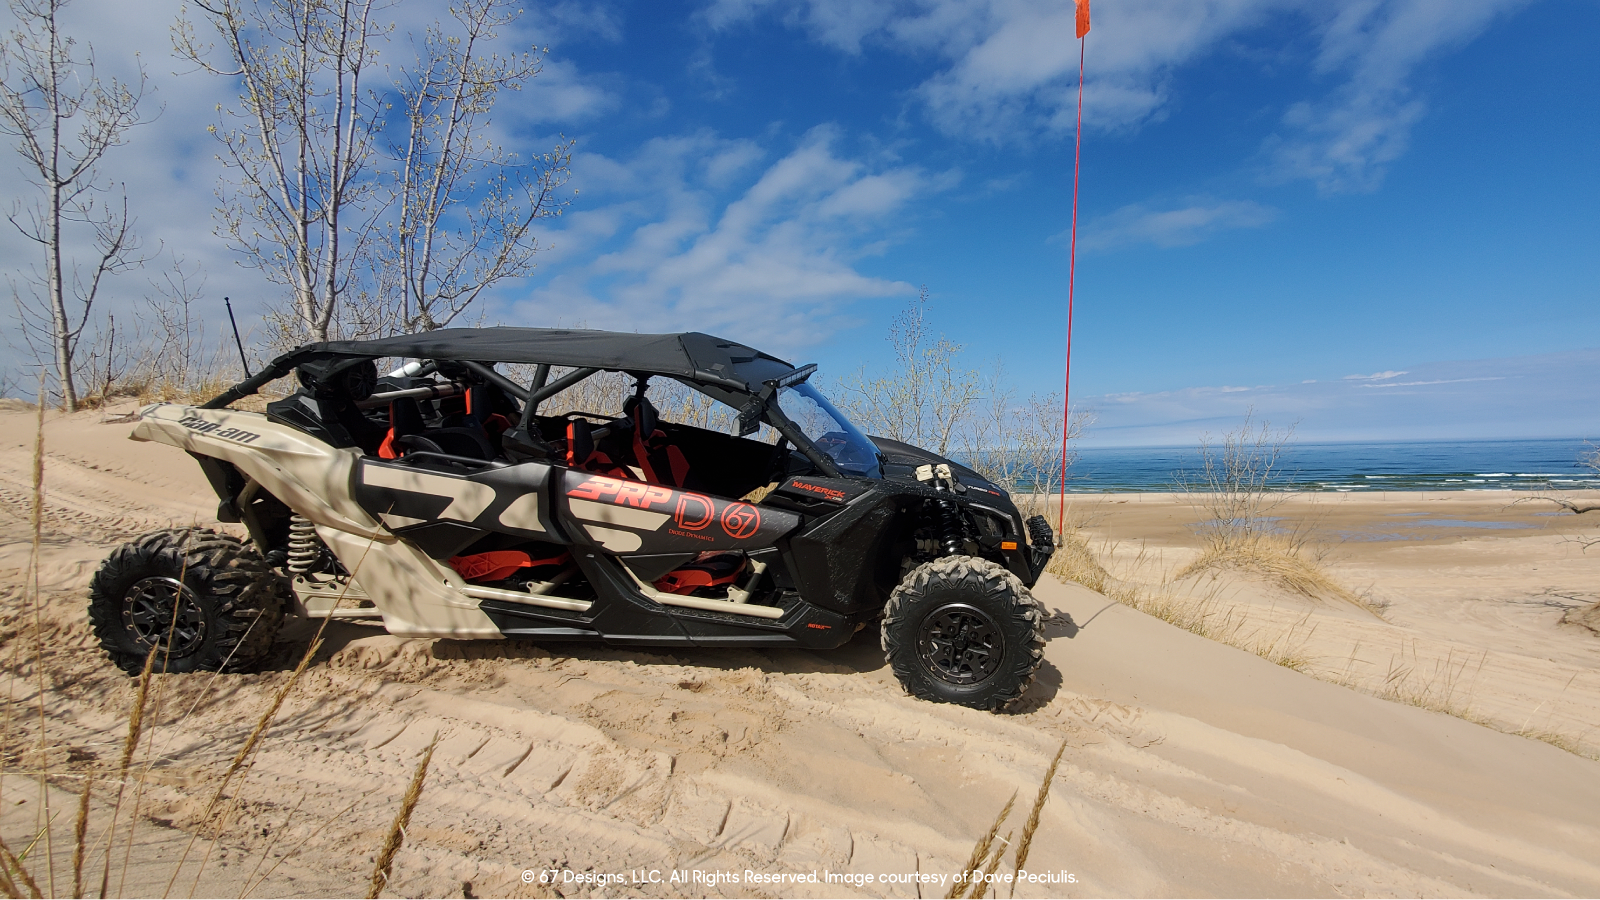 Another shot of Can Am on dunes